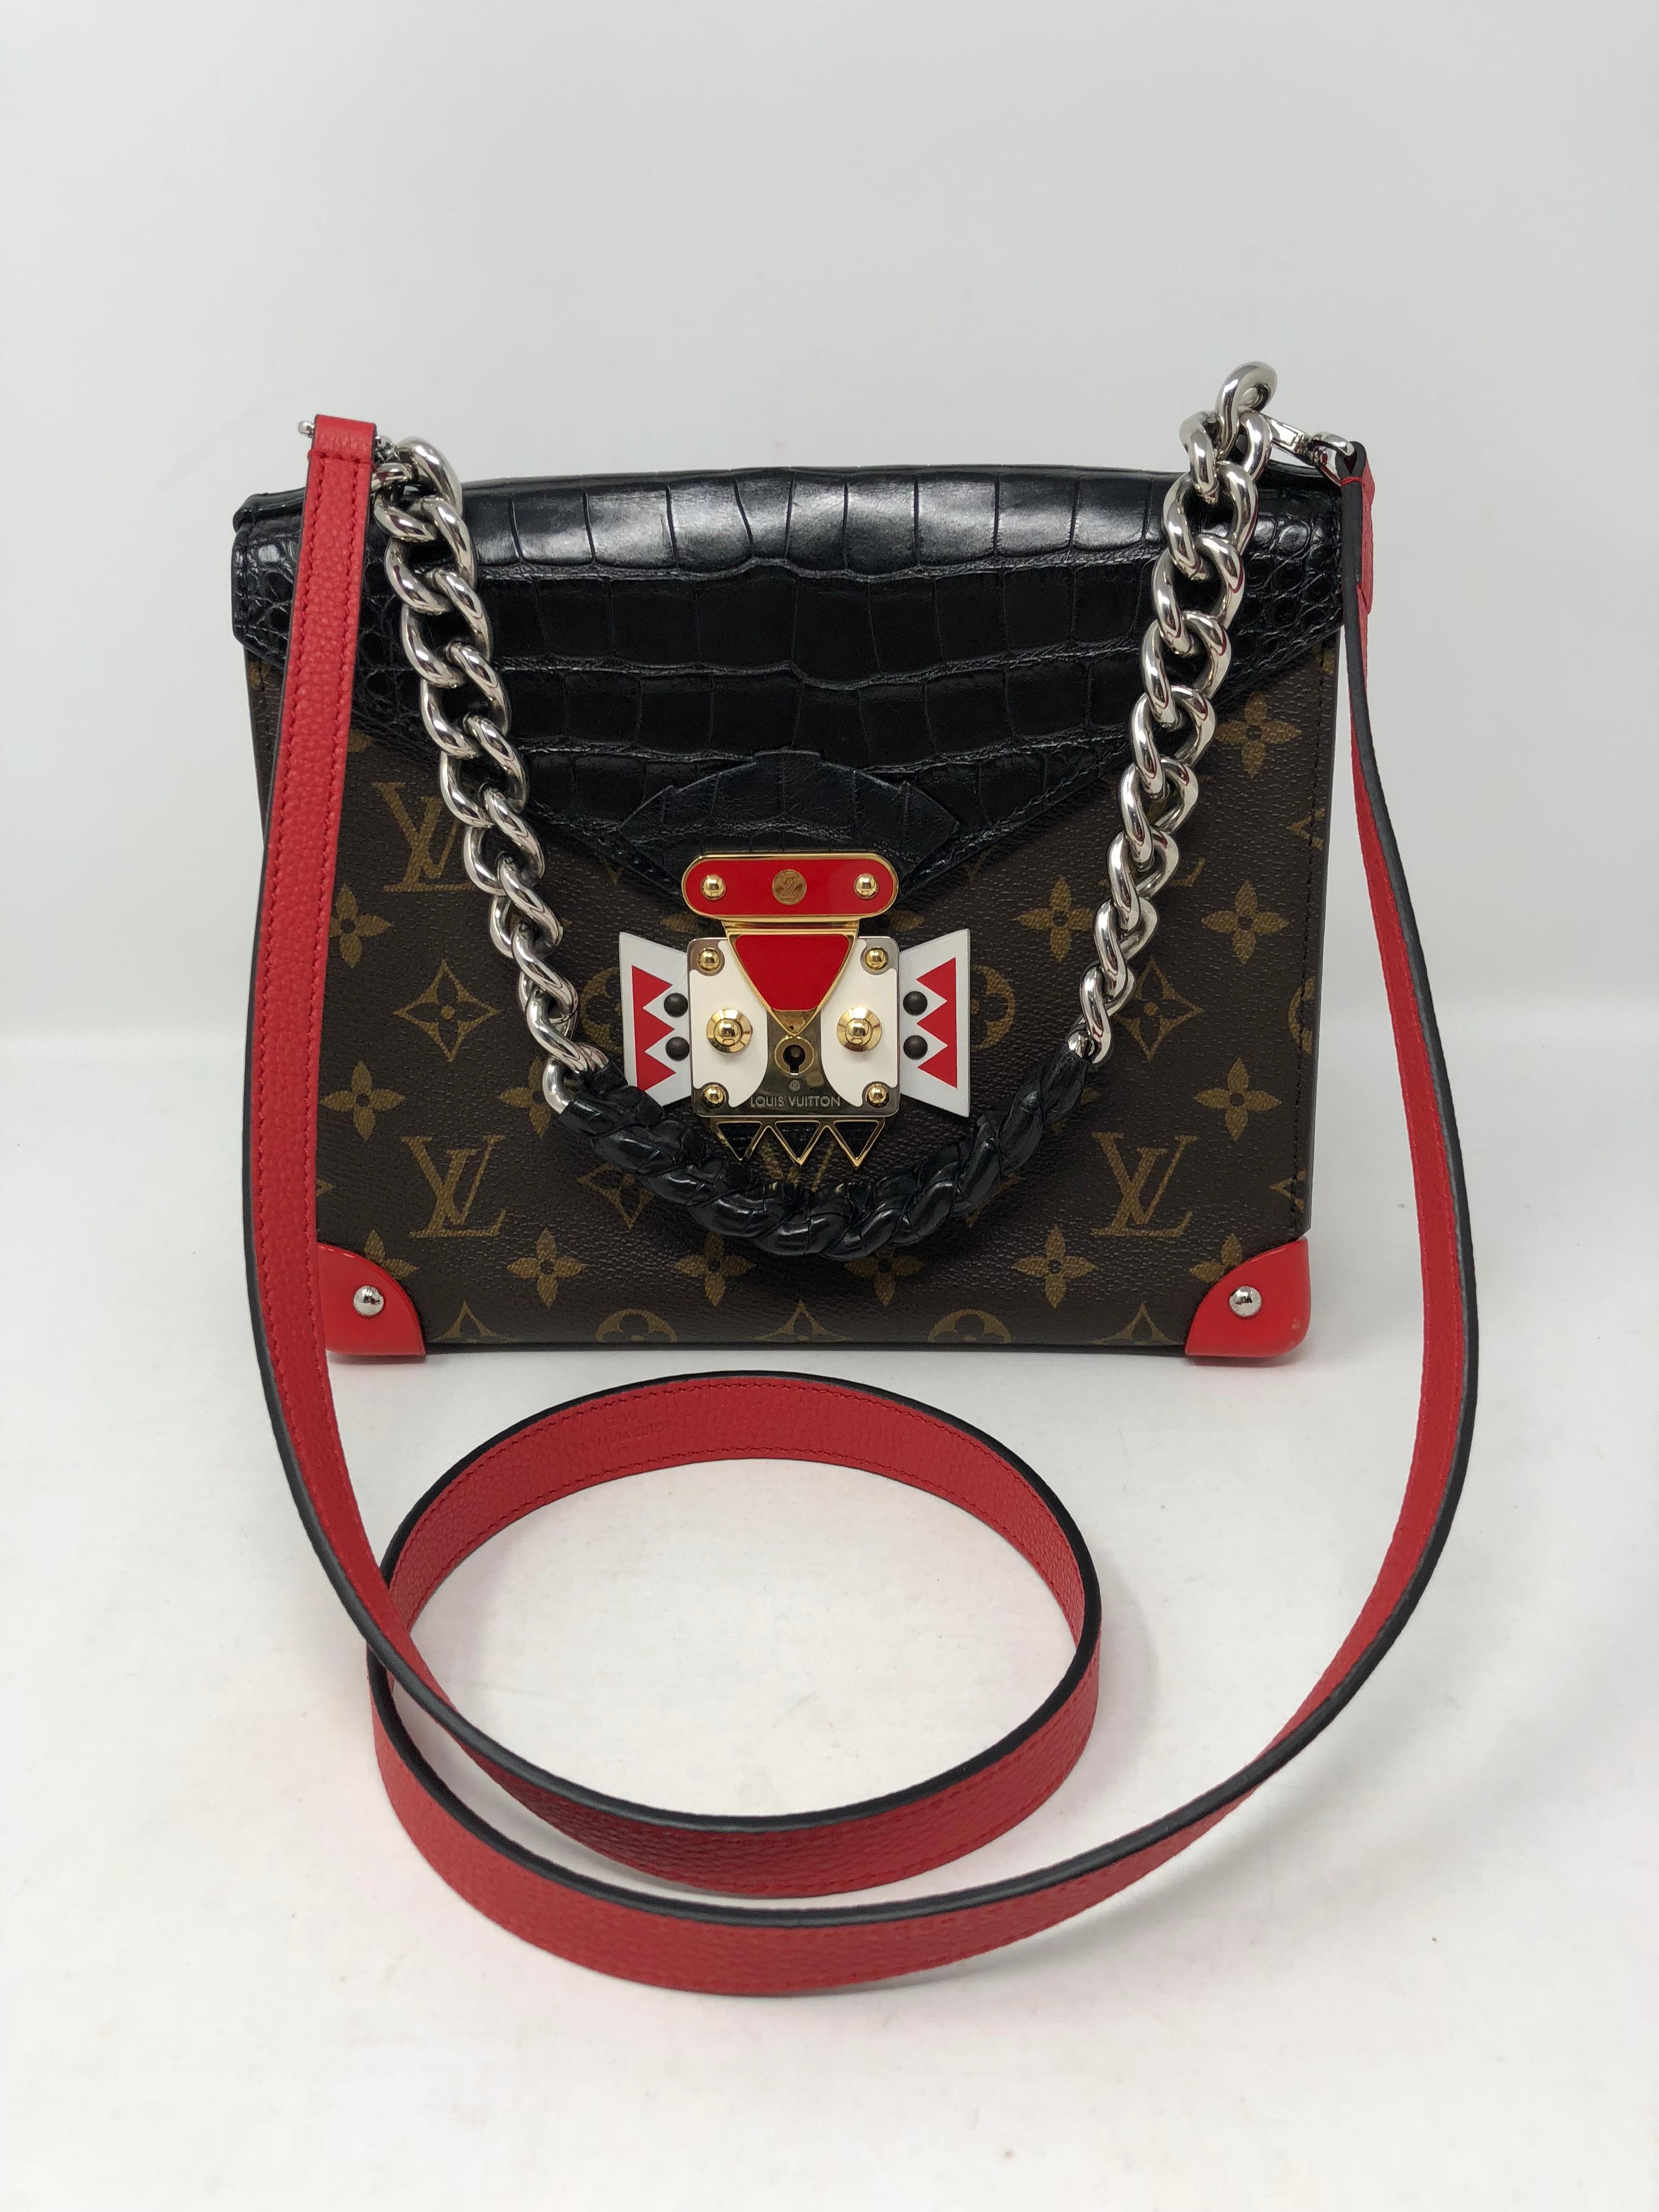 Louis Vuitton Crocodile Tribal Chain Mask Bag GM Noir Black. Very rare and unique bag by LV. Made of real crocodile and crafted of monogram toile canvas. Features a Louis Vuitton mask embellishment on the clasp. An additional new red strap was just